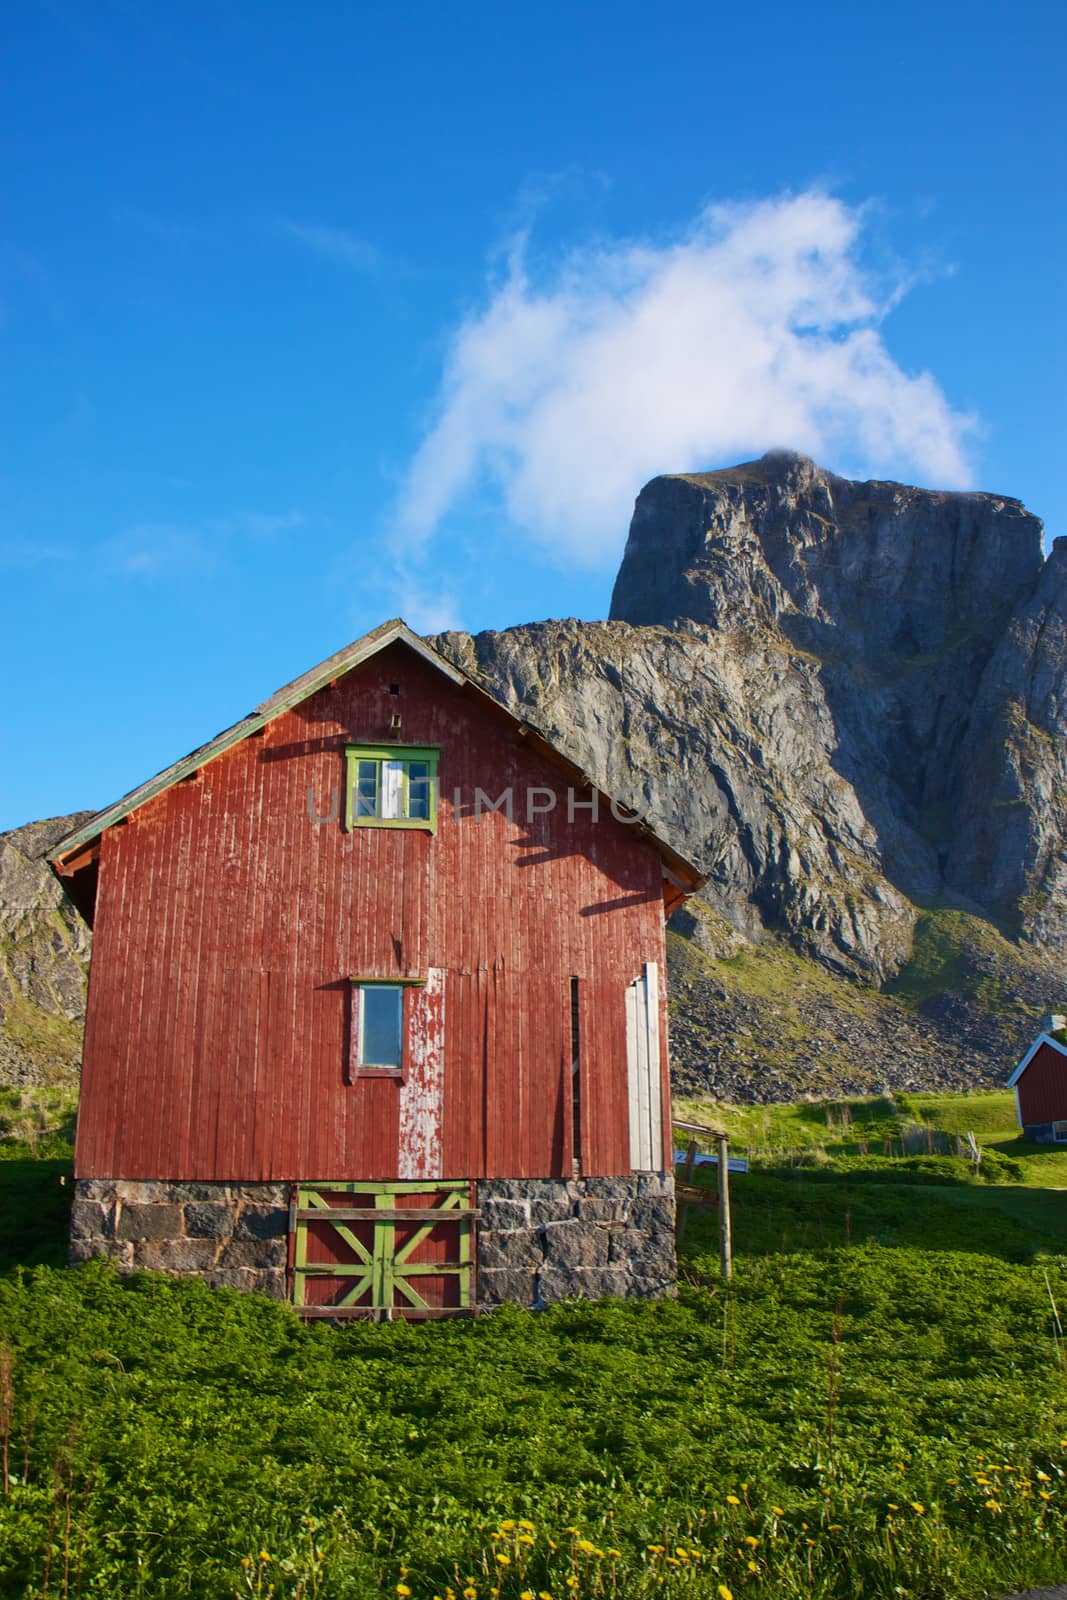 Norwegian shed by Harvepino